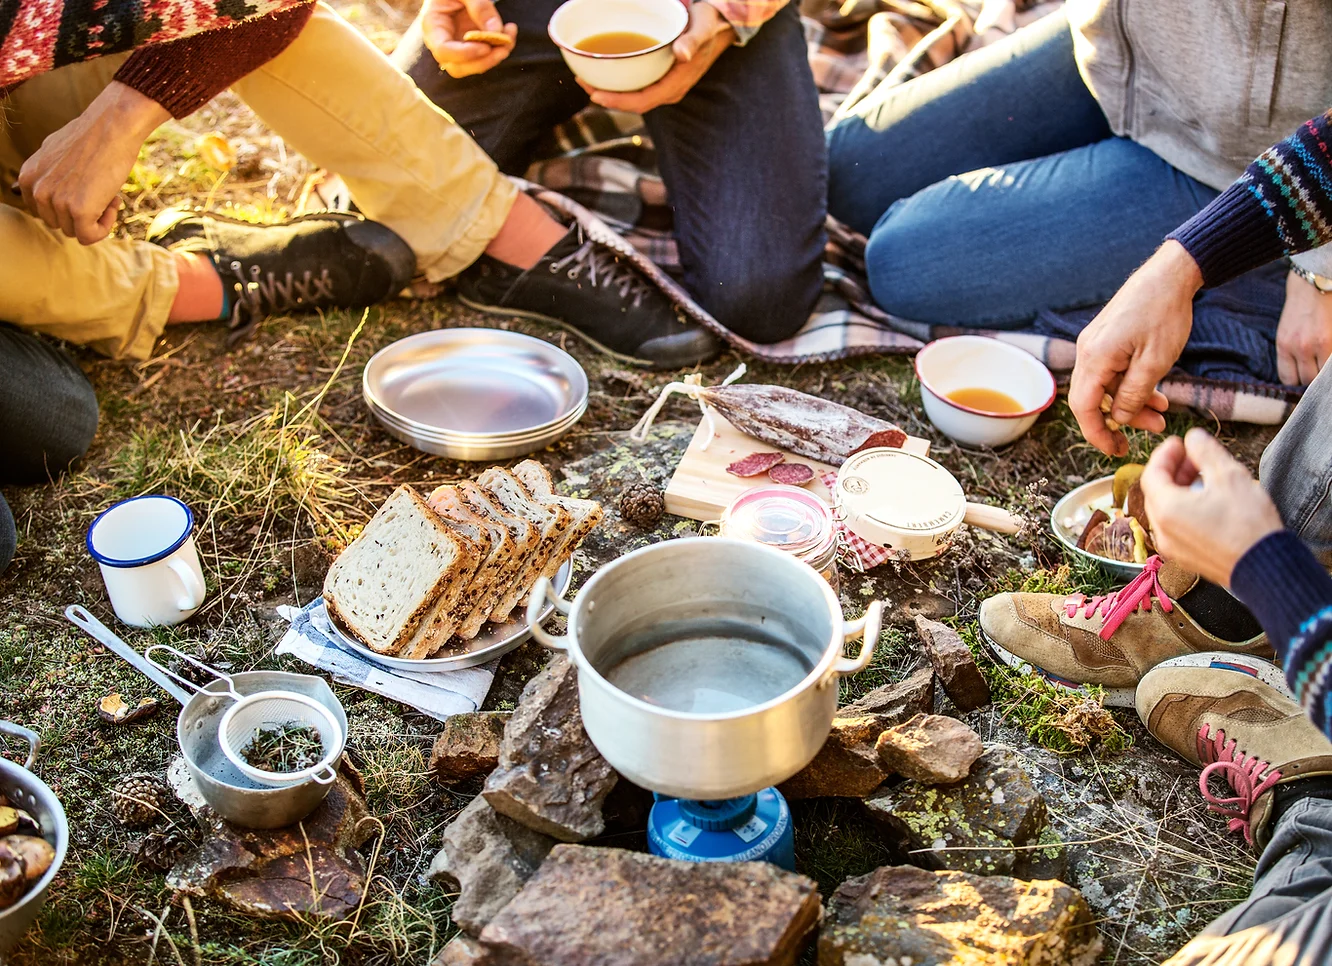 a group of campers enjoying a varied breakfast from a camp stove, including bread and sausage.